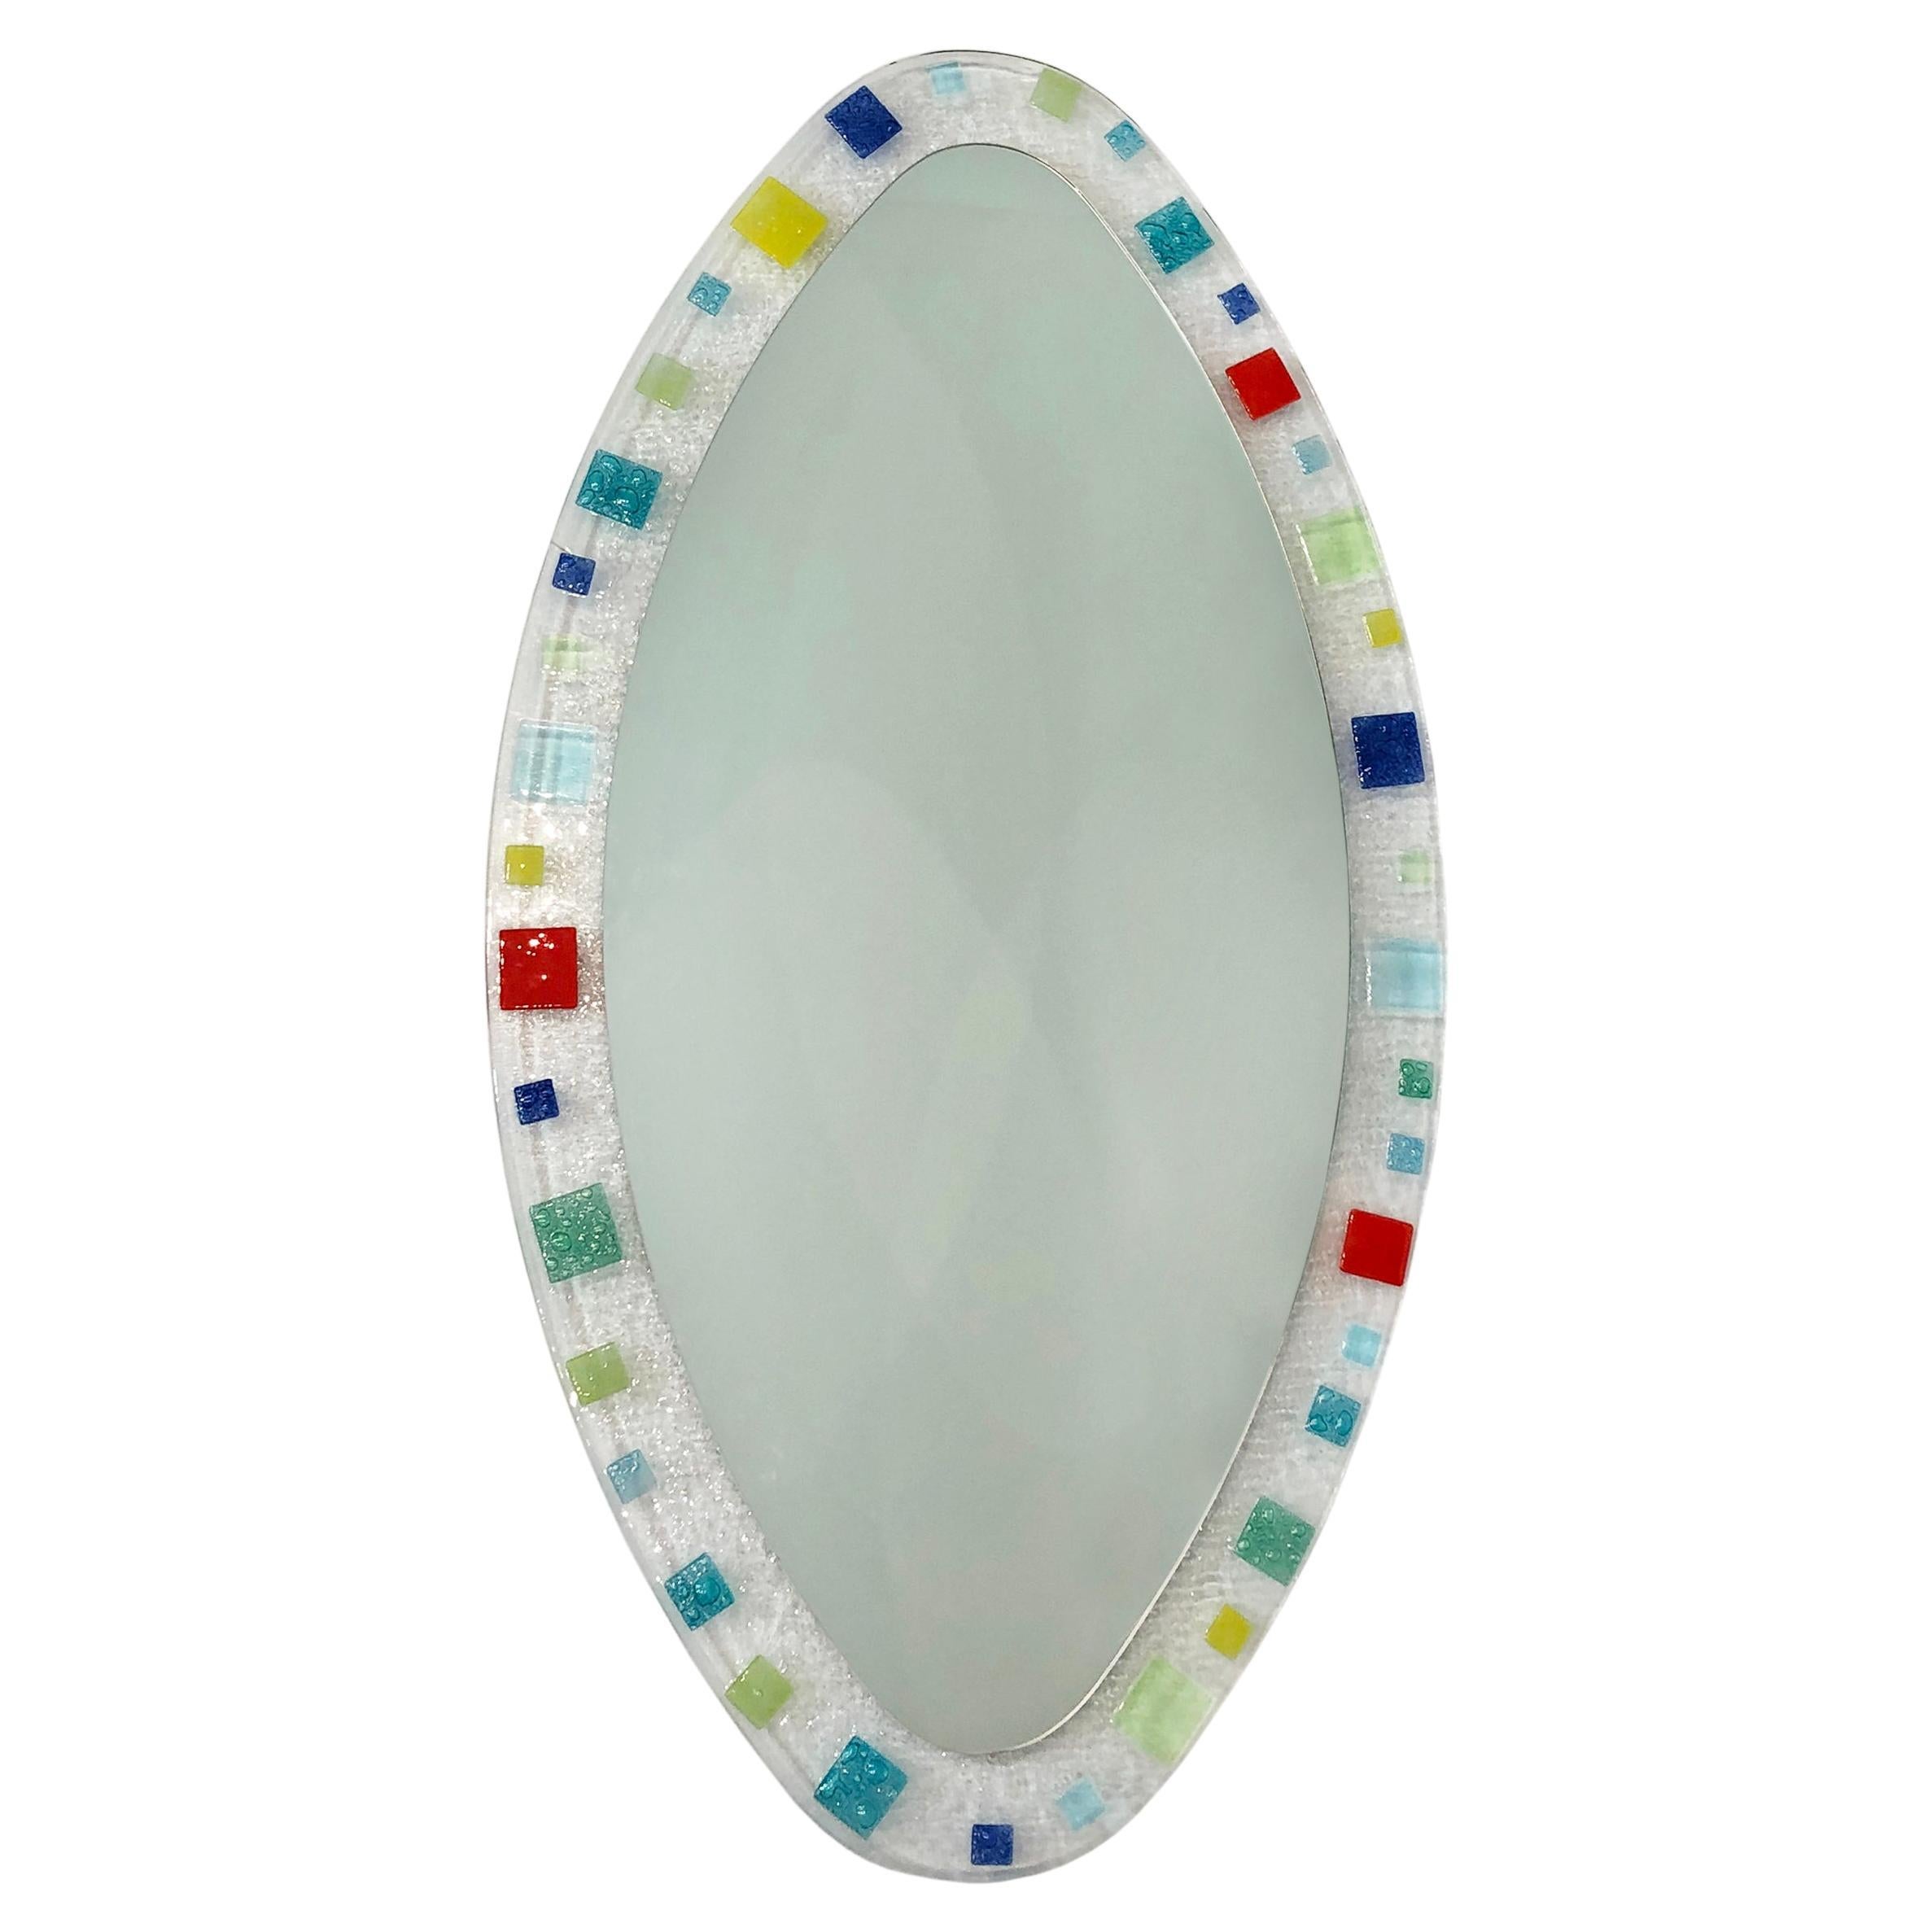 Large Murano Glass Oval Wall Mirror 1970s Midcentury Vintage Red Blue Green